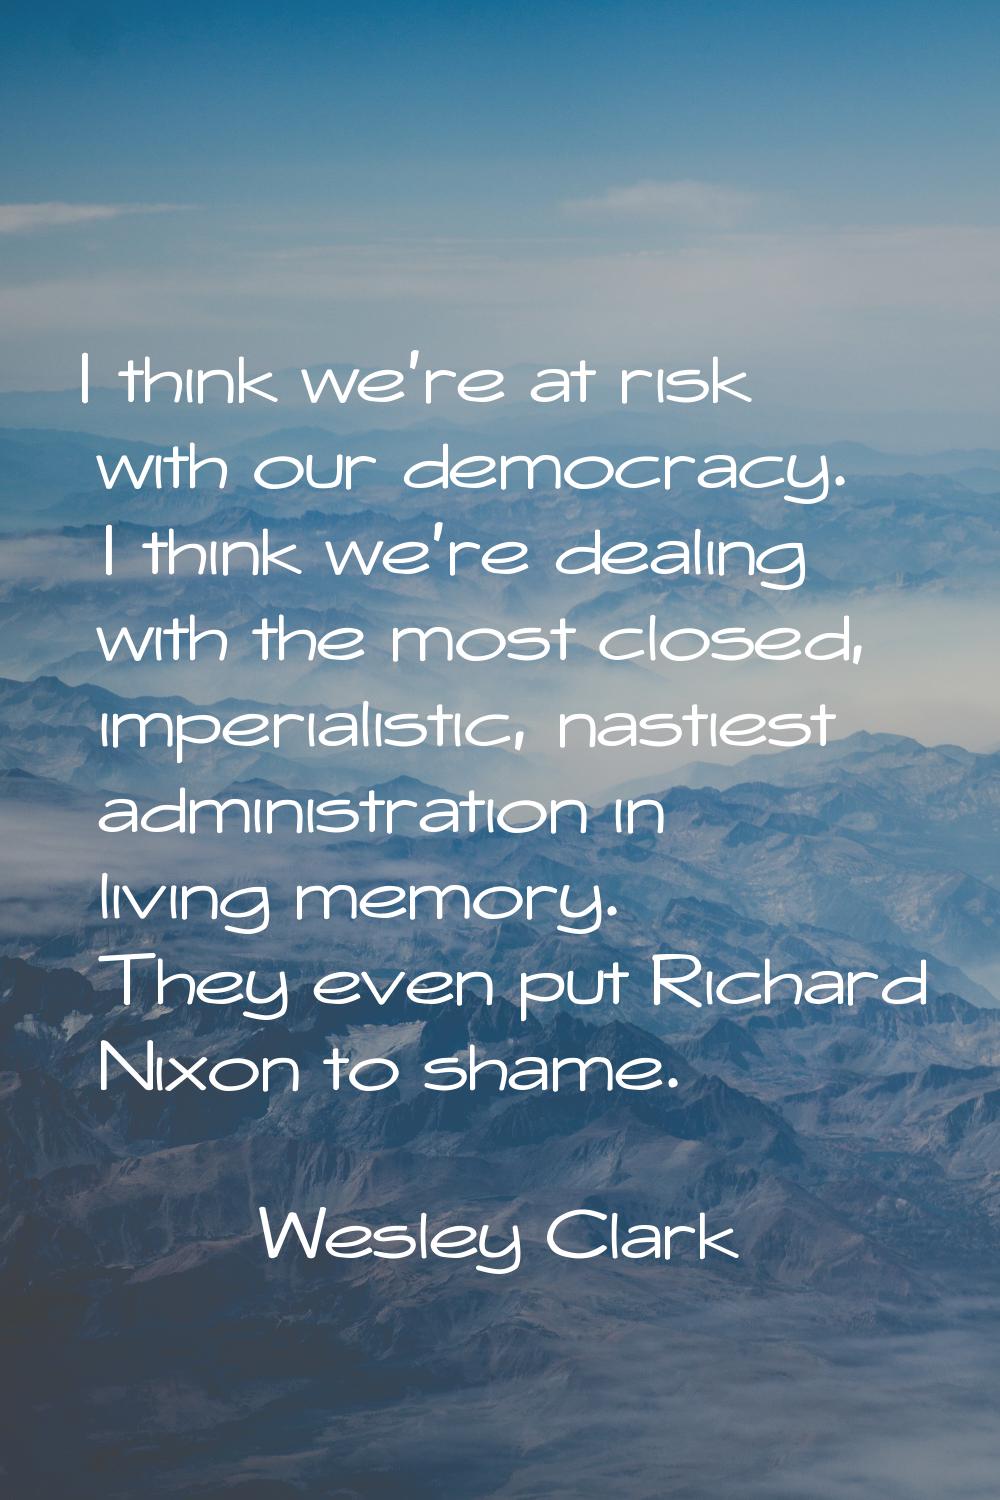 I think we're at risk with our democracy. I think we're dealing with the most closed, imperialistic